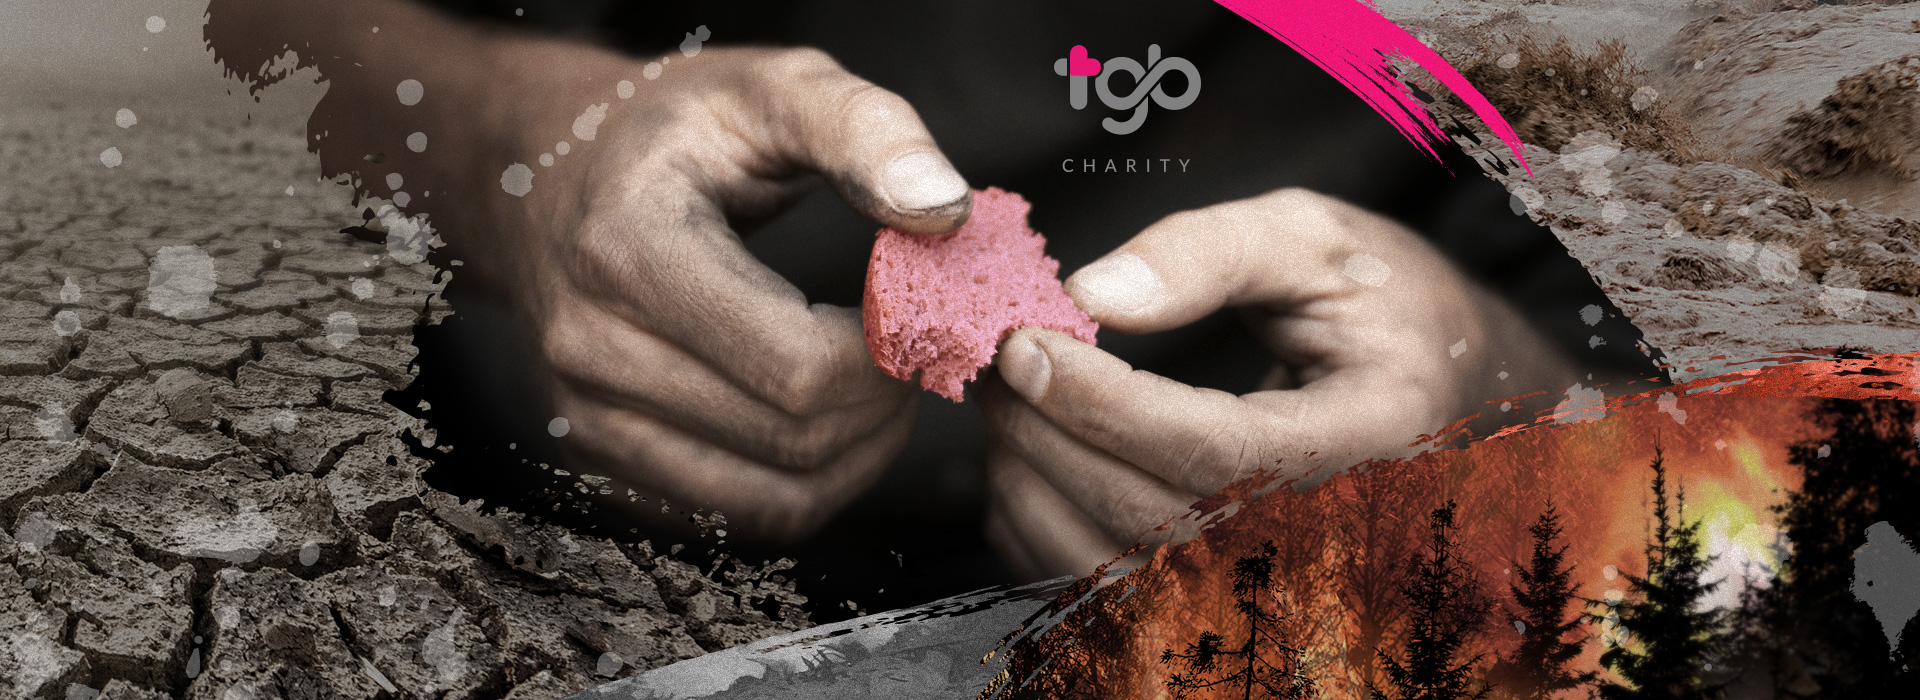 TGB Charity: The risk of global food crisis is rising under climate change.